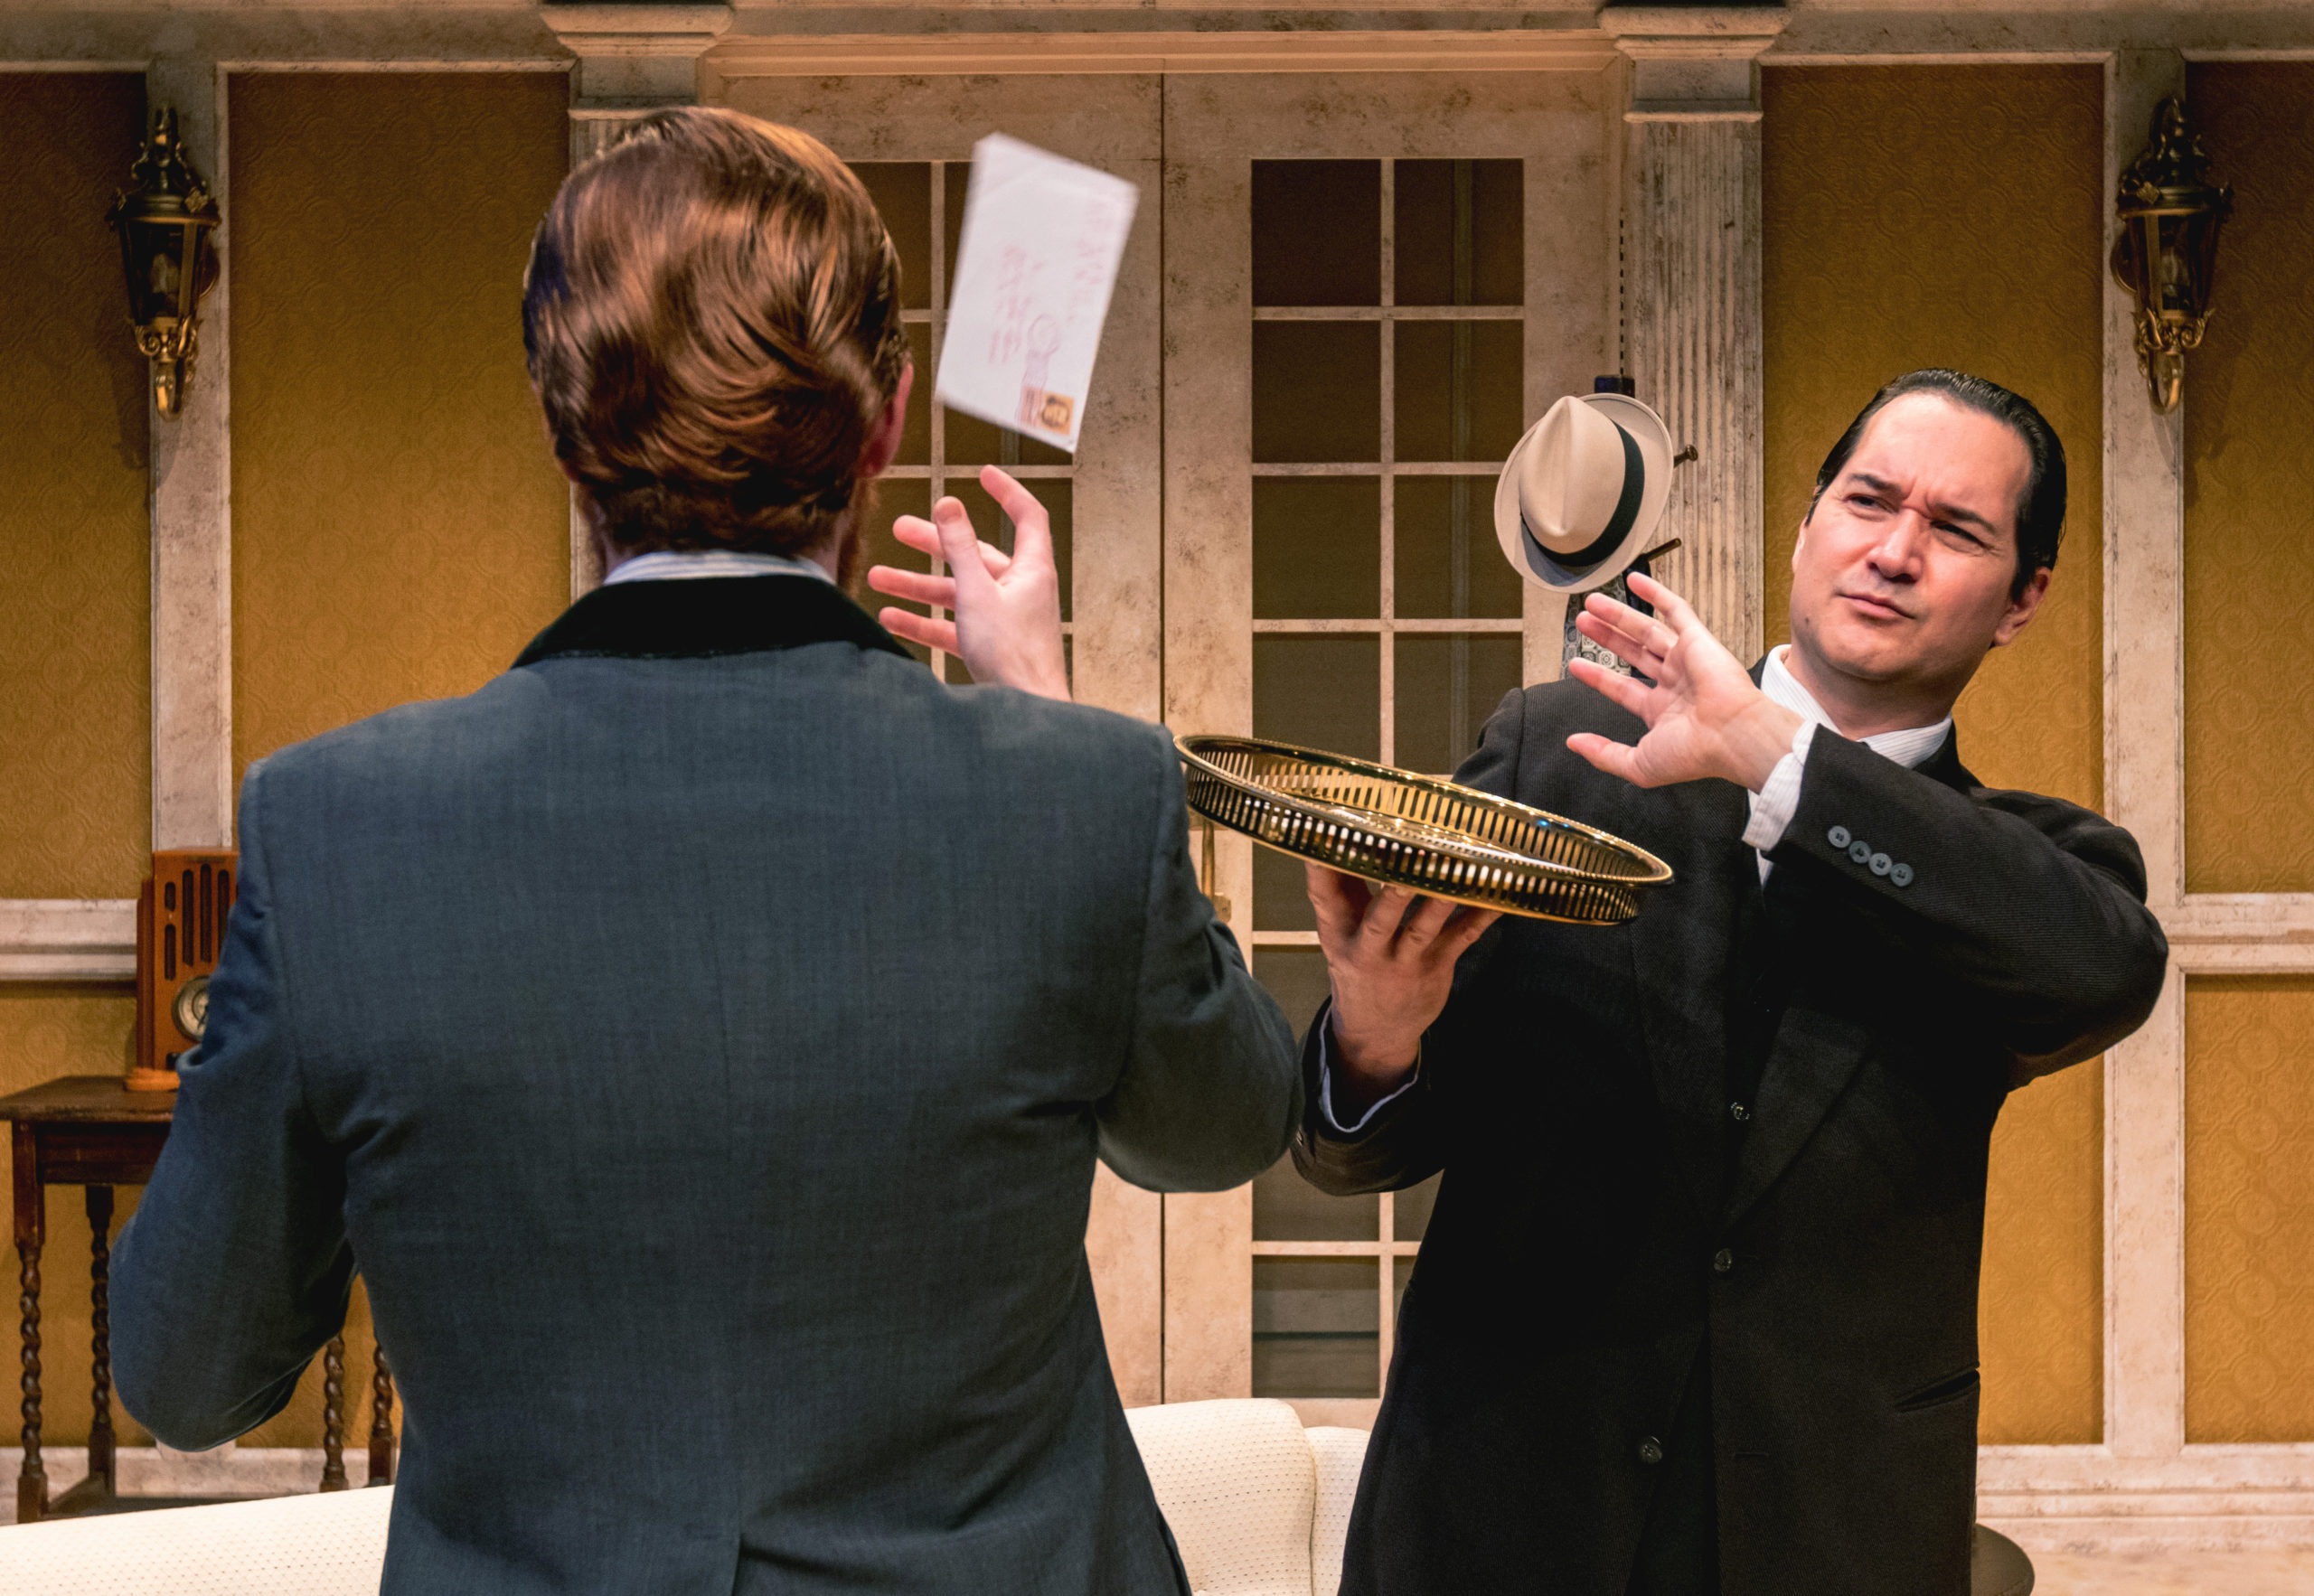 Left to Right: Calder Shilling and Richard Nguyen Sloniker in Jeeves Takes a Bow at Taproot Theatre. Photo by Giao Nguyen.